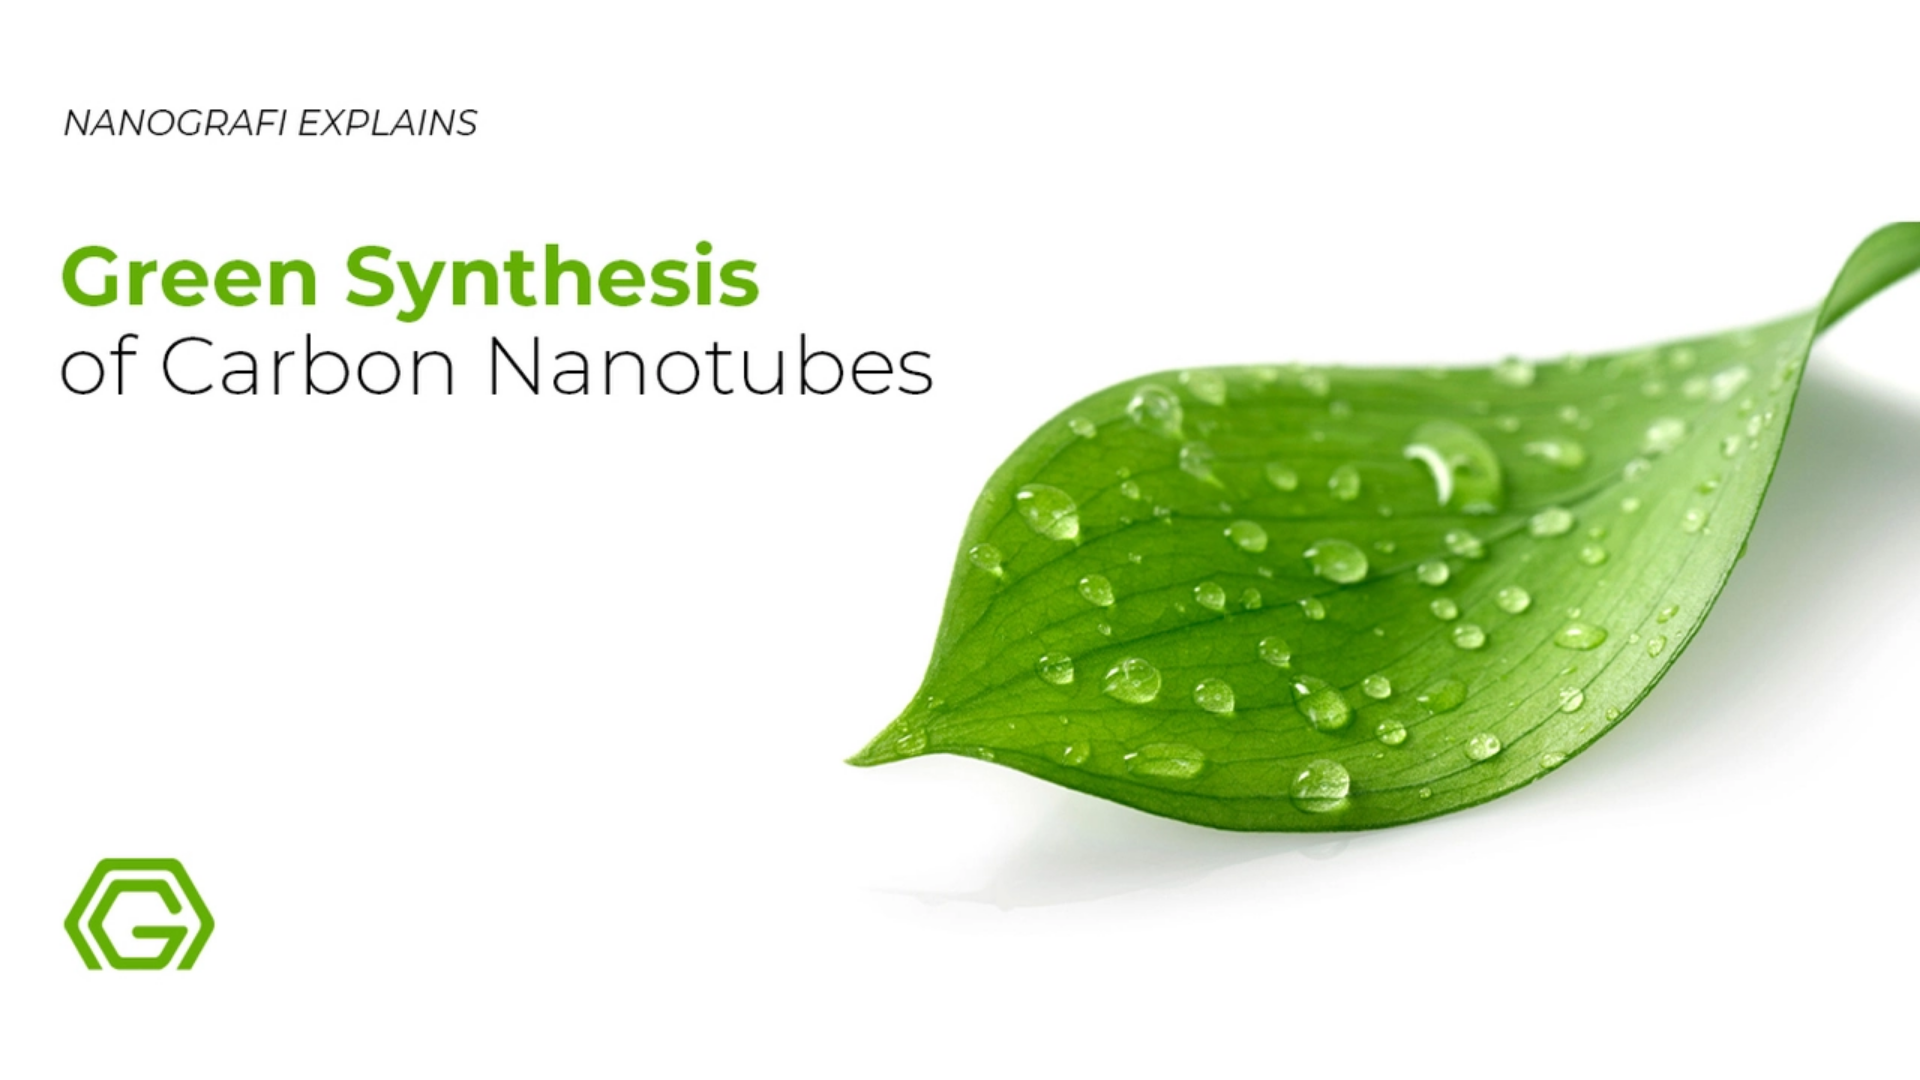 Green synthesis of carbon nanotubes